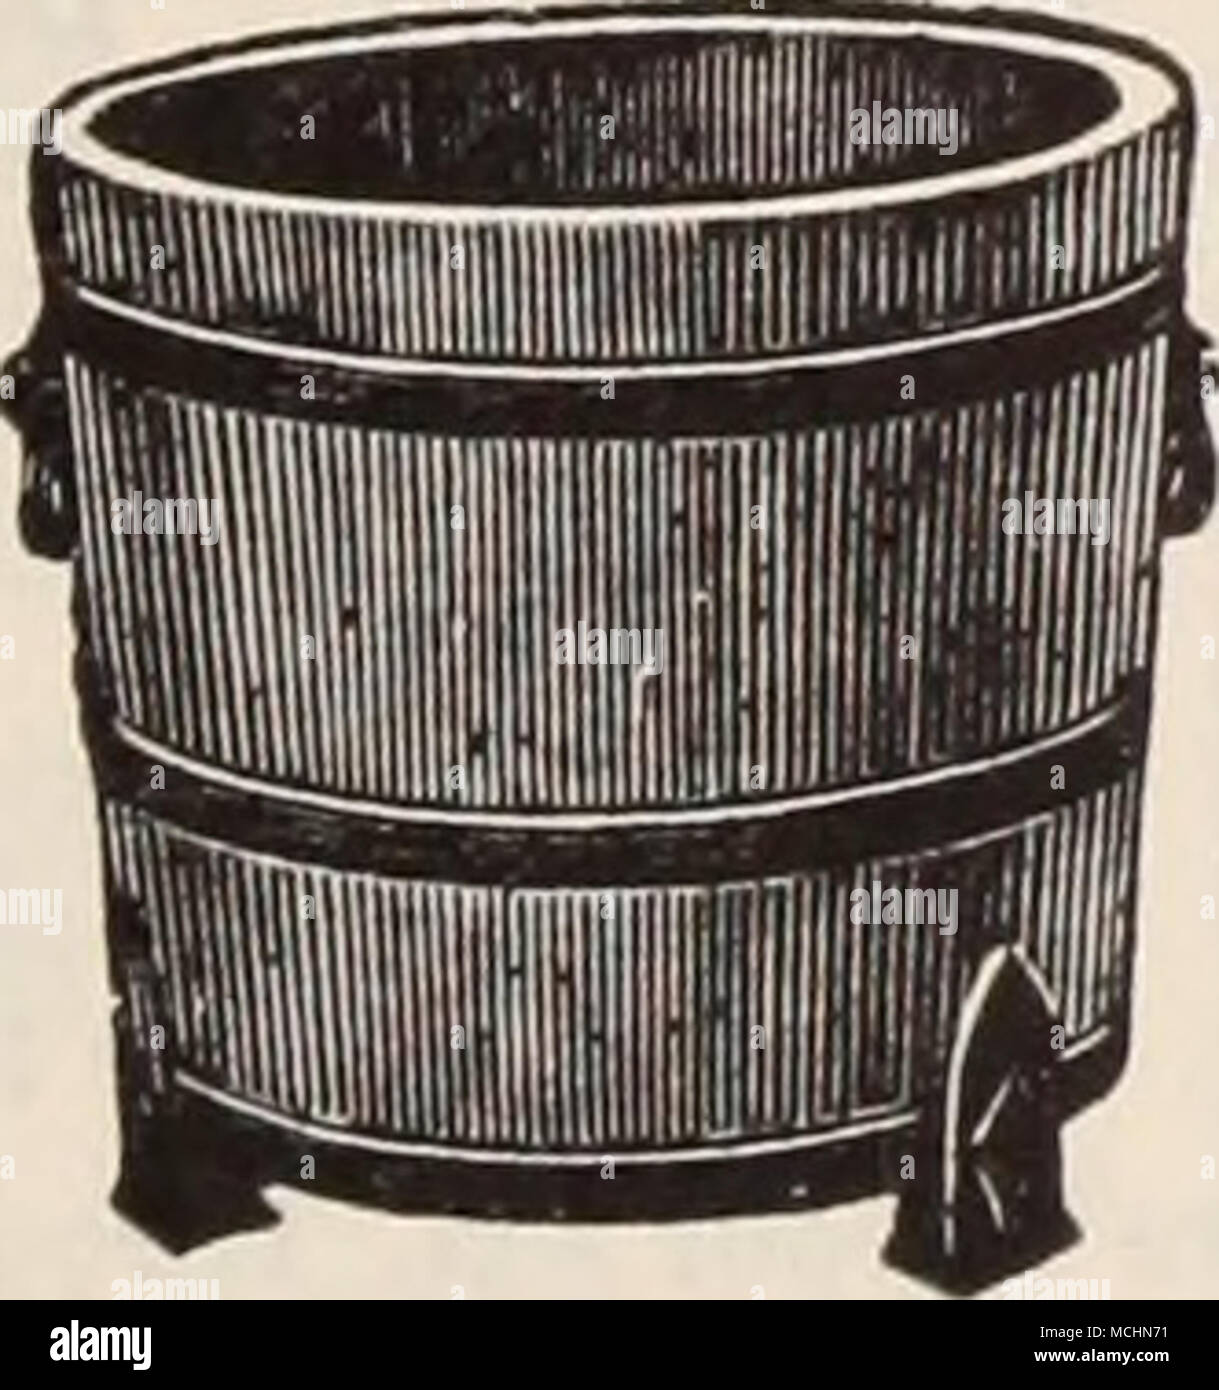 . HEAVY TREE AND PLANT TUBS Made of white cedar, painted green and bound with extra heavy iron hoops; drop handles and iron feet supplied with all sizes. Removable bottom. Heavy Tree anu Plant Tub WOOD FIBRE SAUCERS Extremely neat in appearance, finished in mahogany brown. Outside Inside Length of Diam. in. Diam. in. Stave in. Each No. 8 12 10£ 9$ $3 55 No. 7 13 11$ 10 4 10 No. 6 14 12$ 12 4 65 No. 5 16 14$ 14 S 85 No. 4 18 16$ 16 . , 6 50 No. 3 21 18J 18 8 05 No. 2 23 21 20 9 90 No. 1 25 23$ 21$ .... 11 10 No. 0 27 25 24 12 50 10-inch diameter 12 &quot; 14 16 18 Each $0 80 . 1 00 . 1 25 . 1 5 Stock Photo